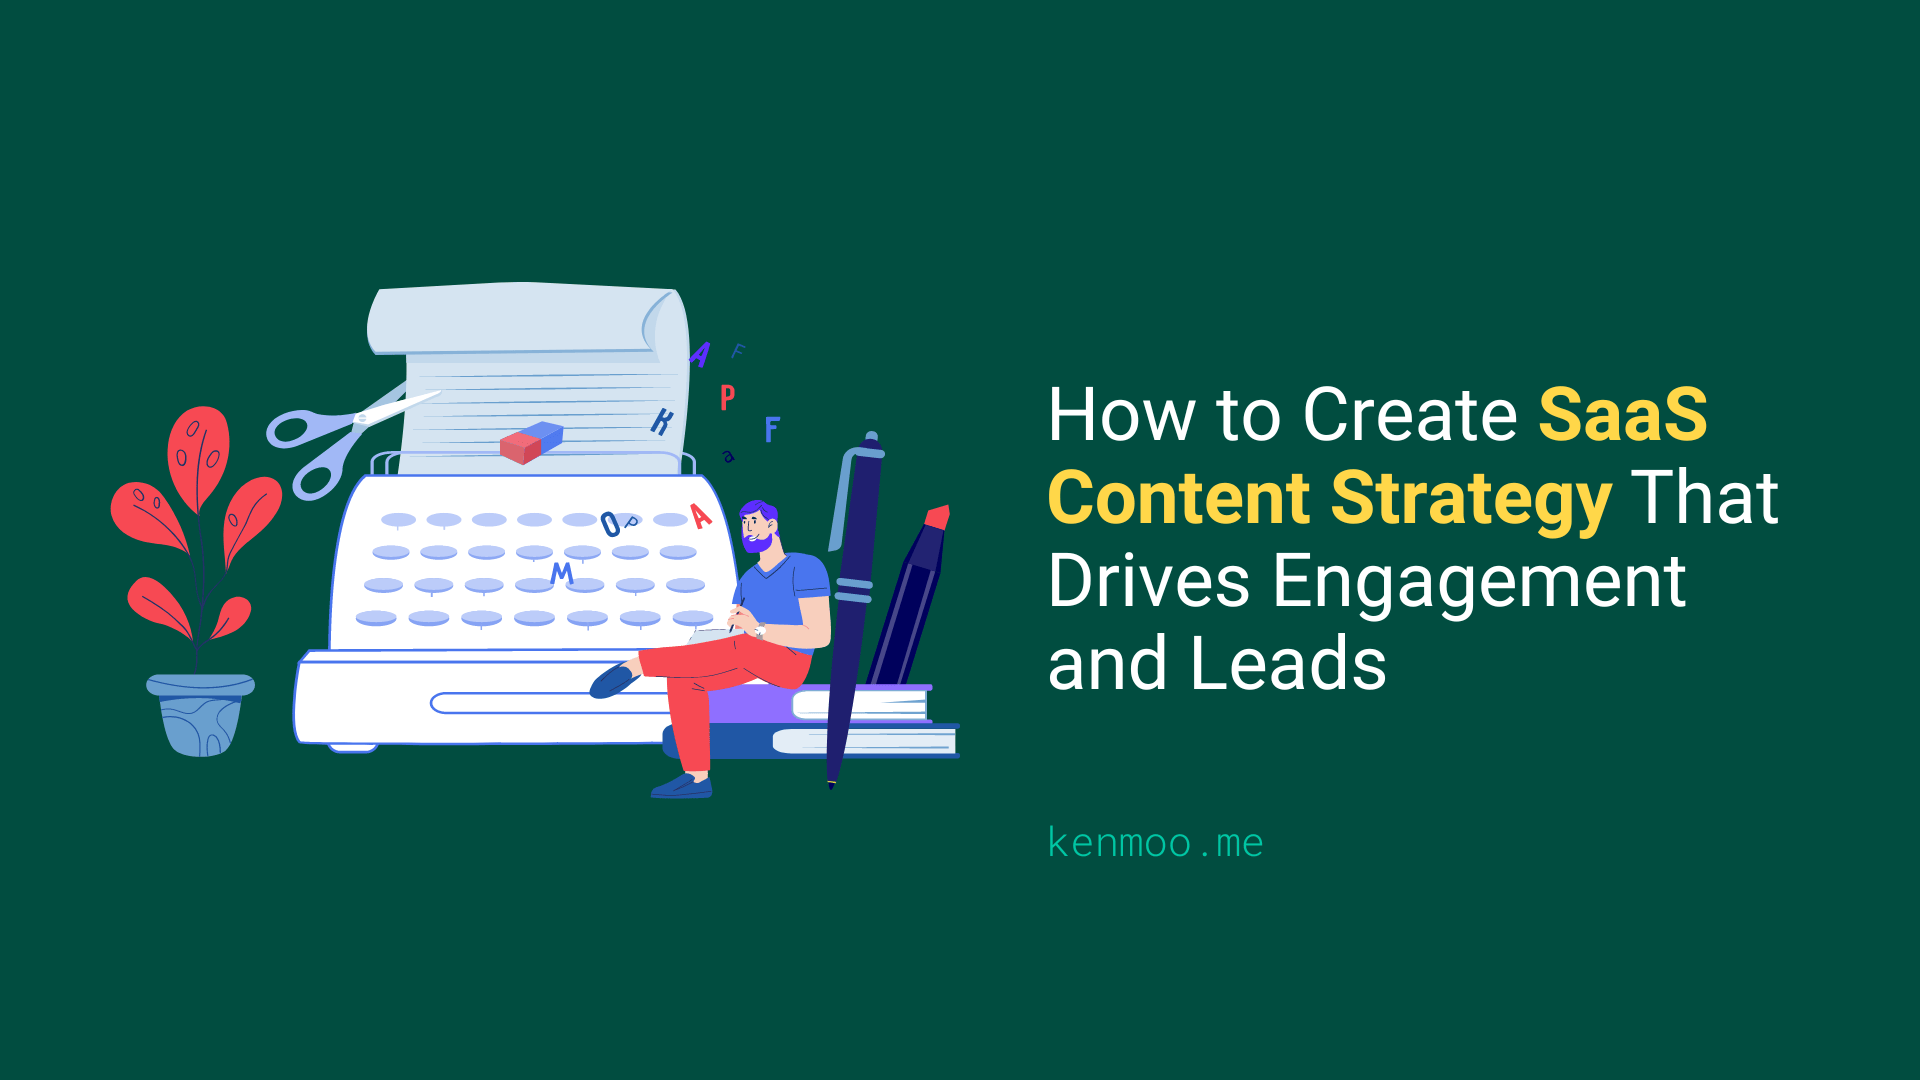 How to Create SaaS Content Strategy That Drives Engagement and Leads